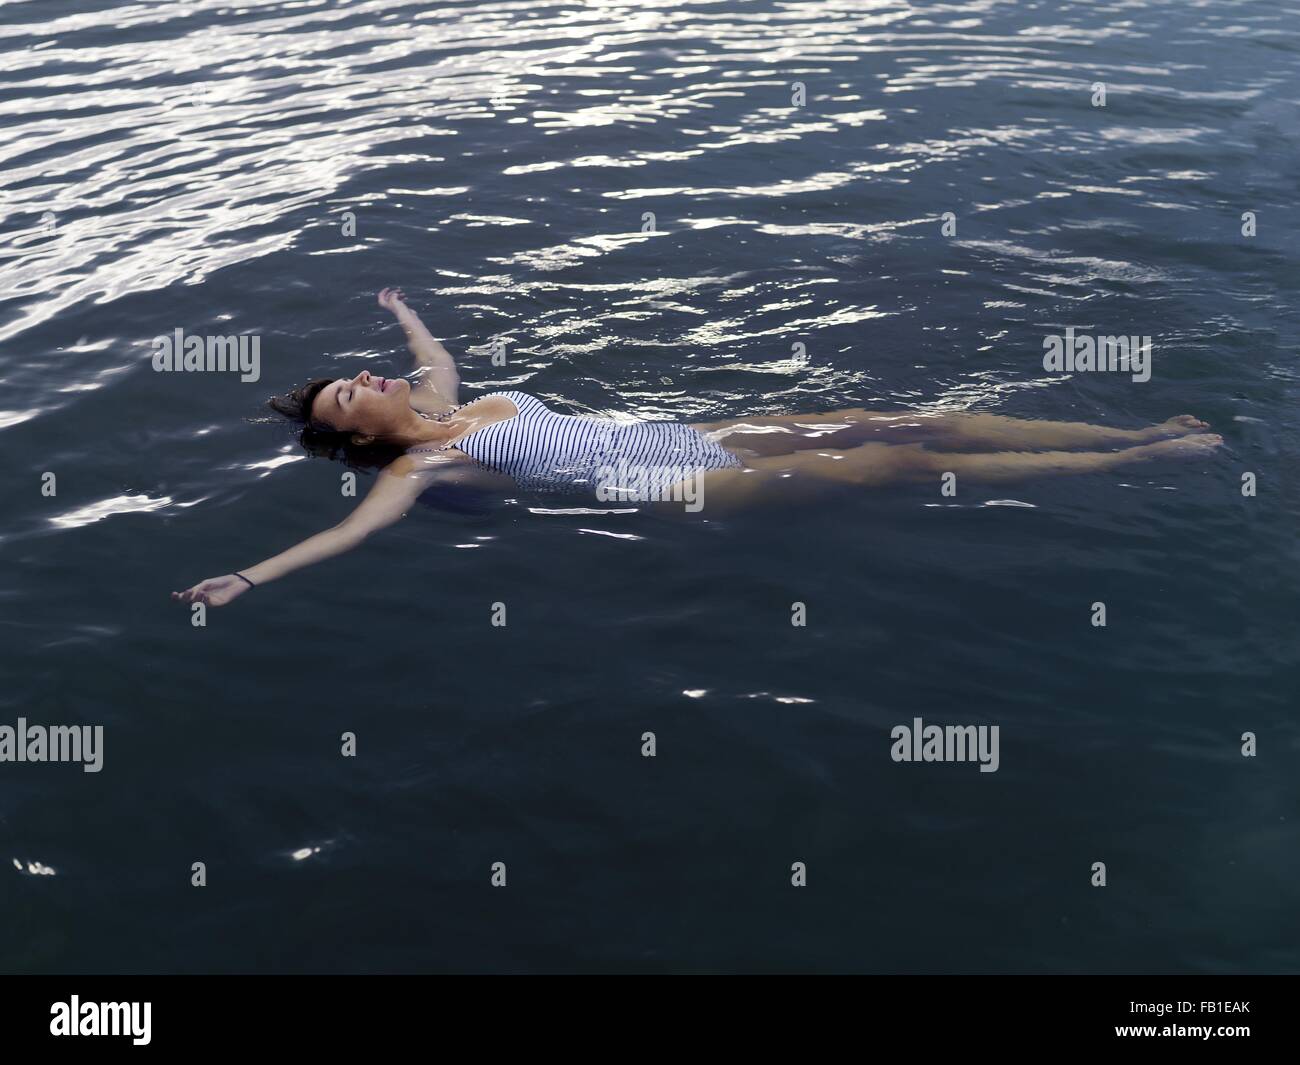 High angle view of woman floating on back in water arms outstretched looking up Stock Photo